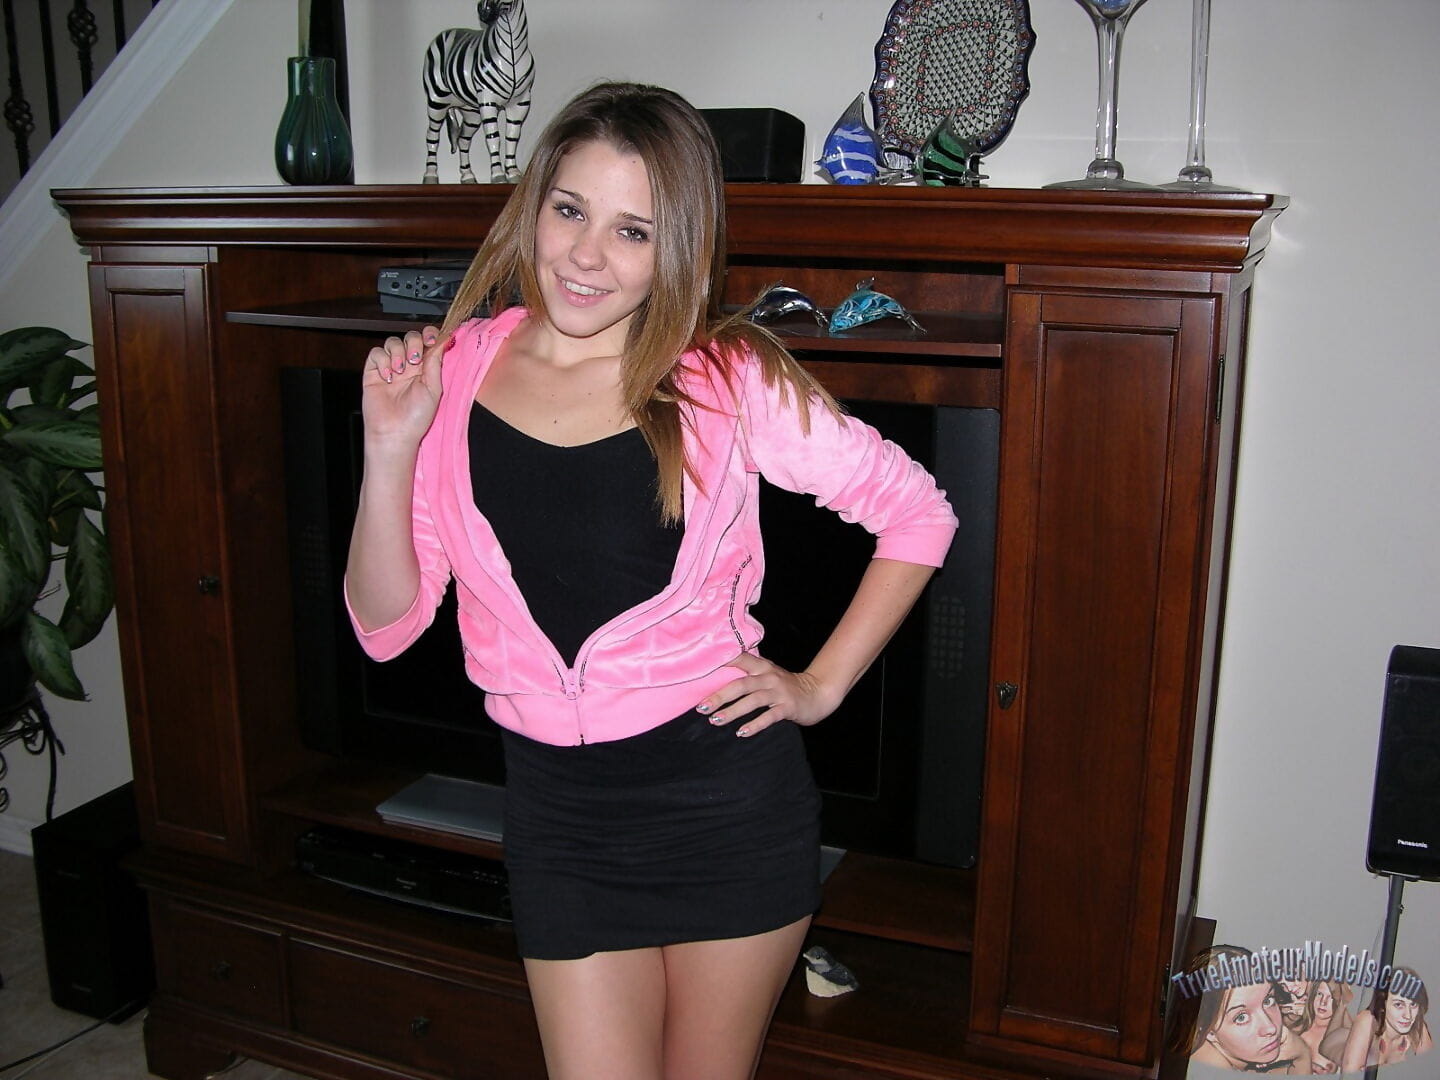 Hot amateur teen babysitter nude - part 3932 page 1